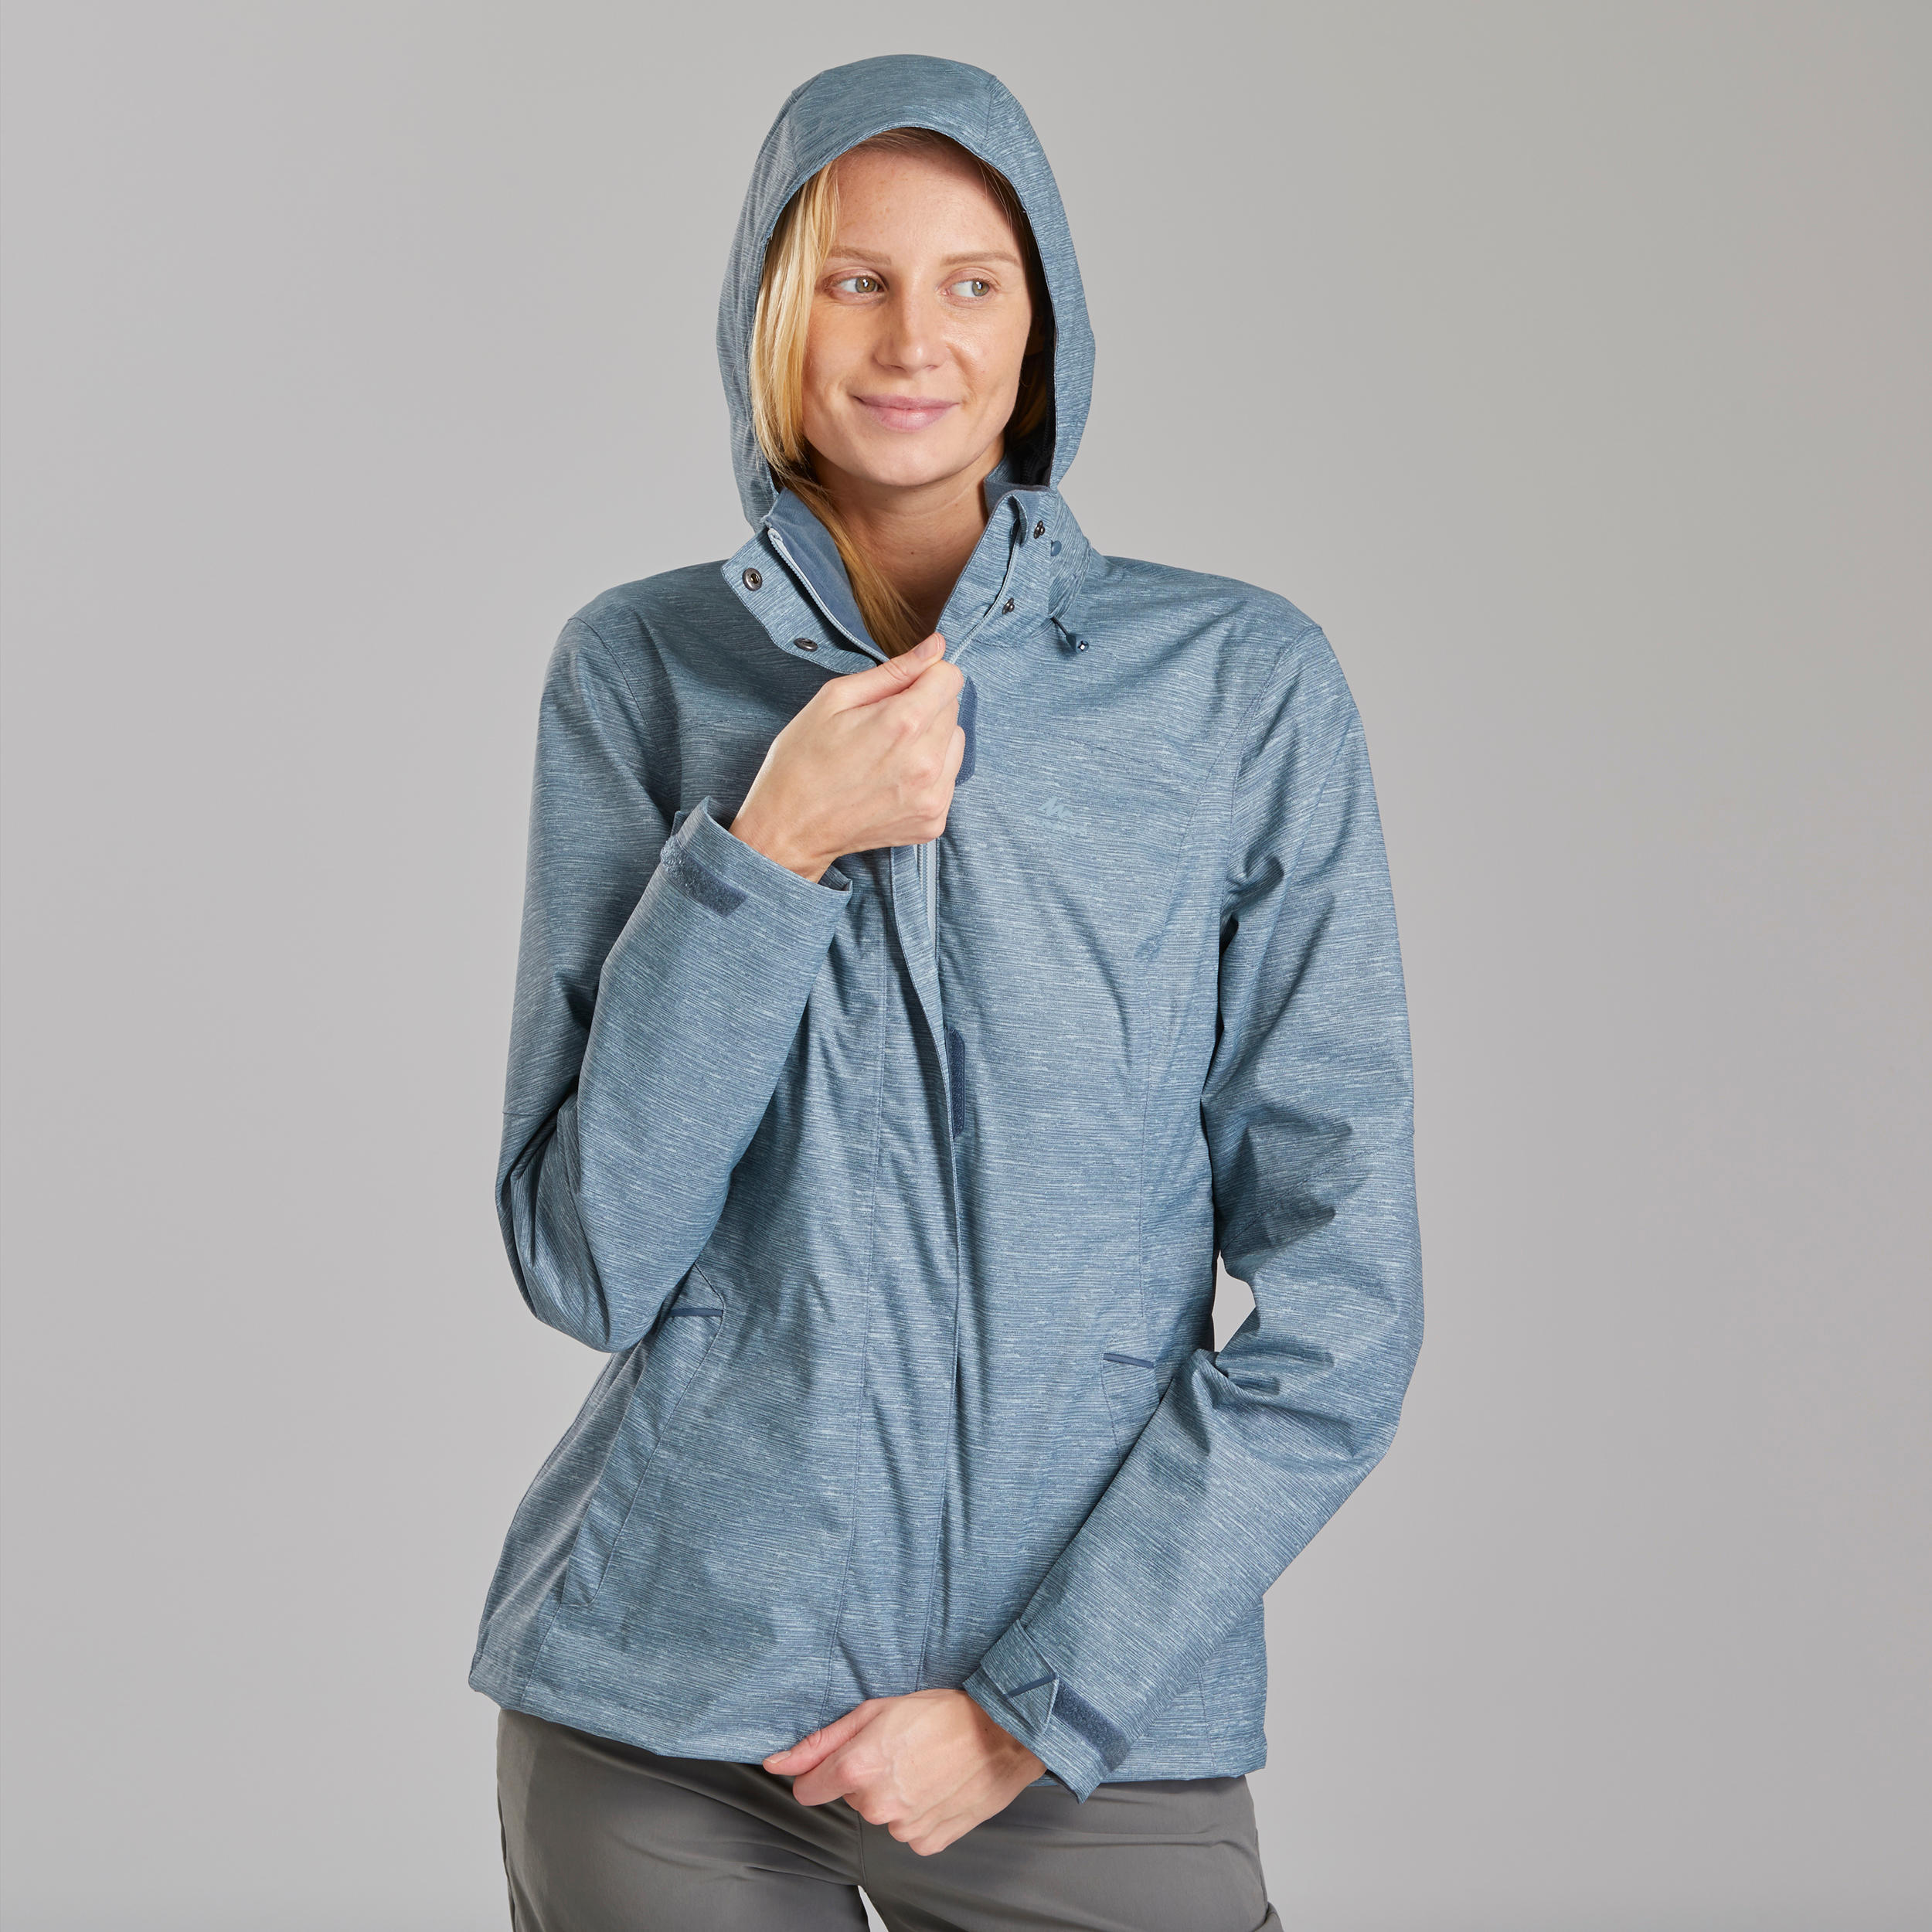 Unlock Wilderness' choice in the Decathlon Vs Patagonia comparison, the MH100 Waterproof Jacket by Decathlon